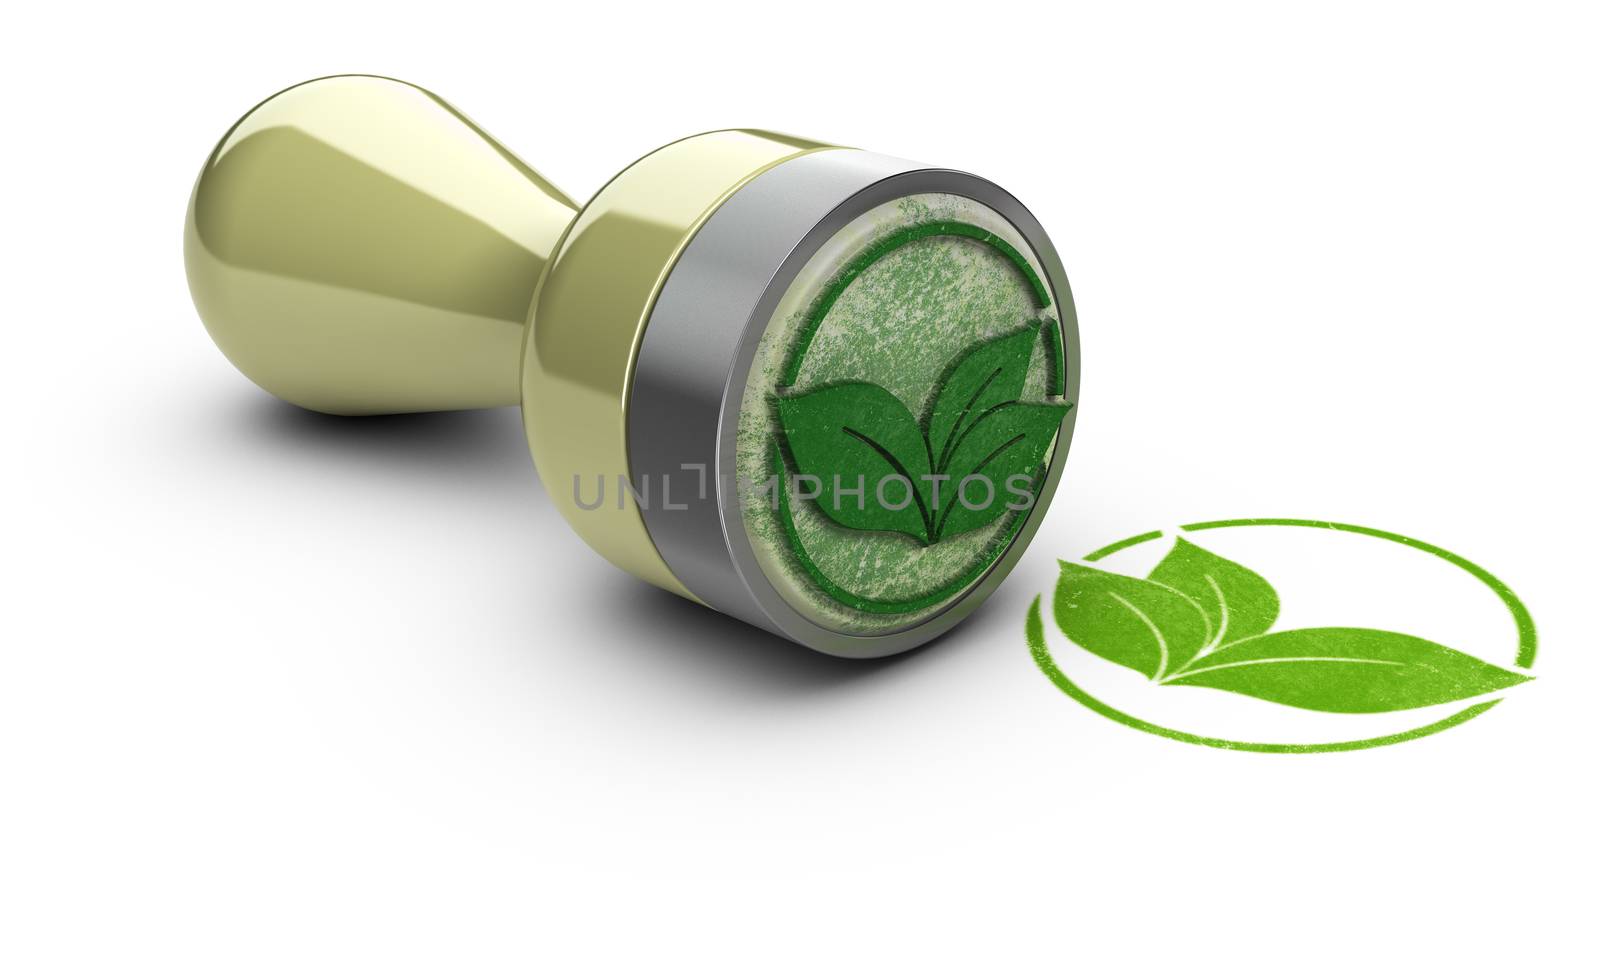 Rubber stamp over white background with leaves symbol printed on it. Concept image for eco friendly communication.